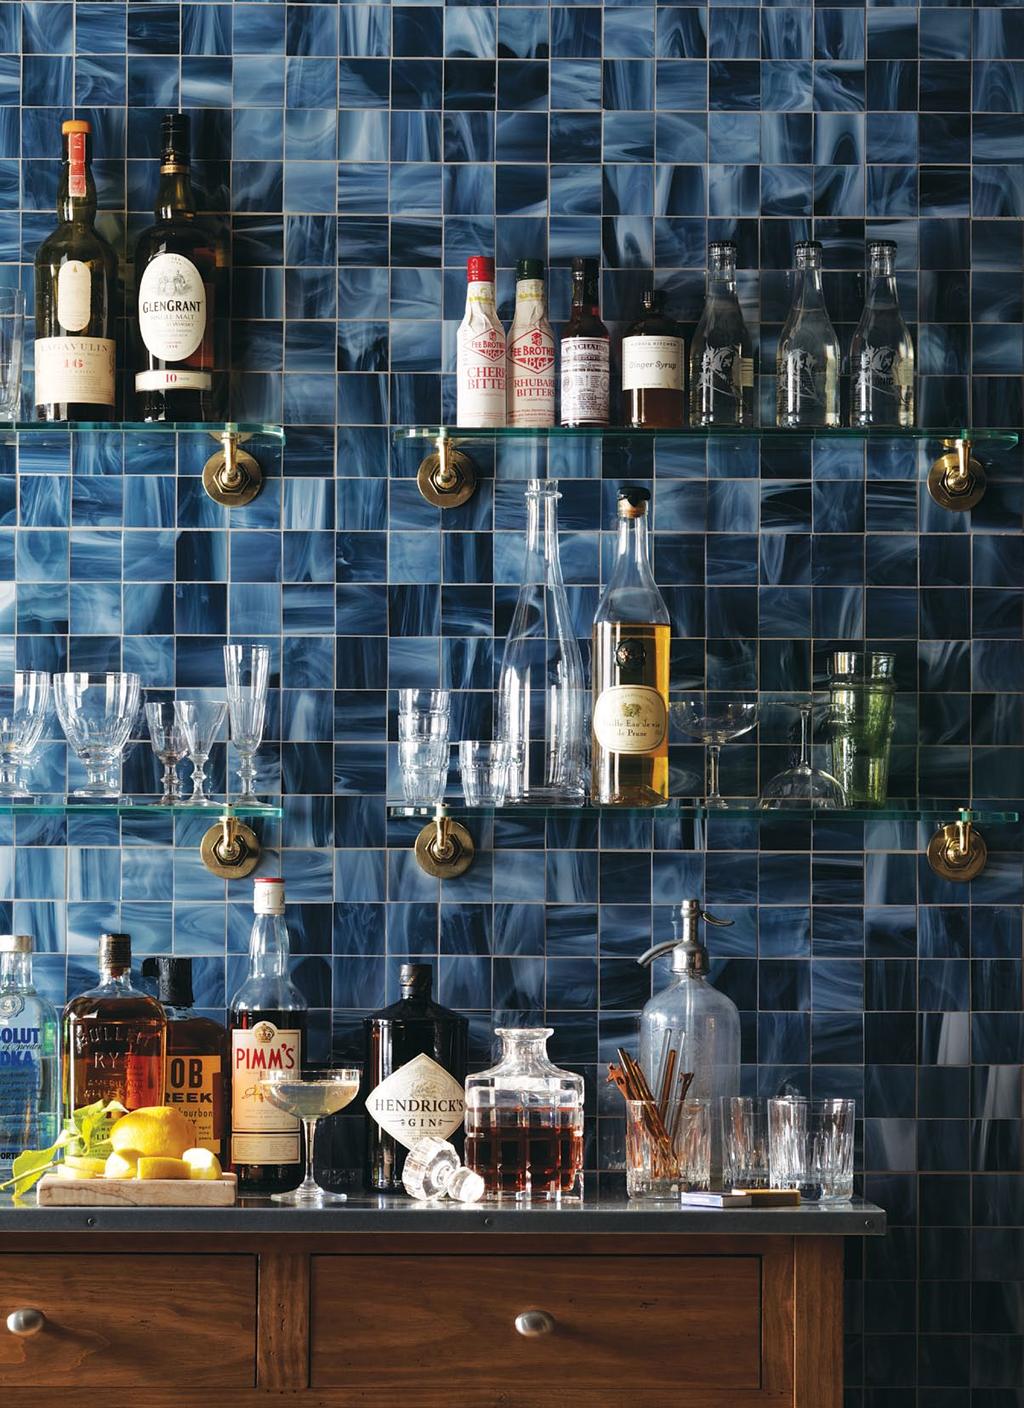 IN MOSAIC OR BRICK, CERAMIC OR STONE, WATERWORKS PRODUCTS LEND UNEXPECTED INTEREST TO SURFACES THROUGHOUT THE HOUSE.